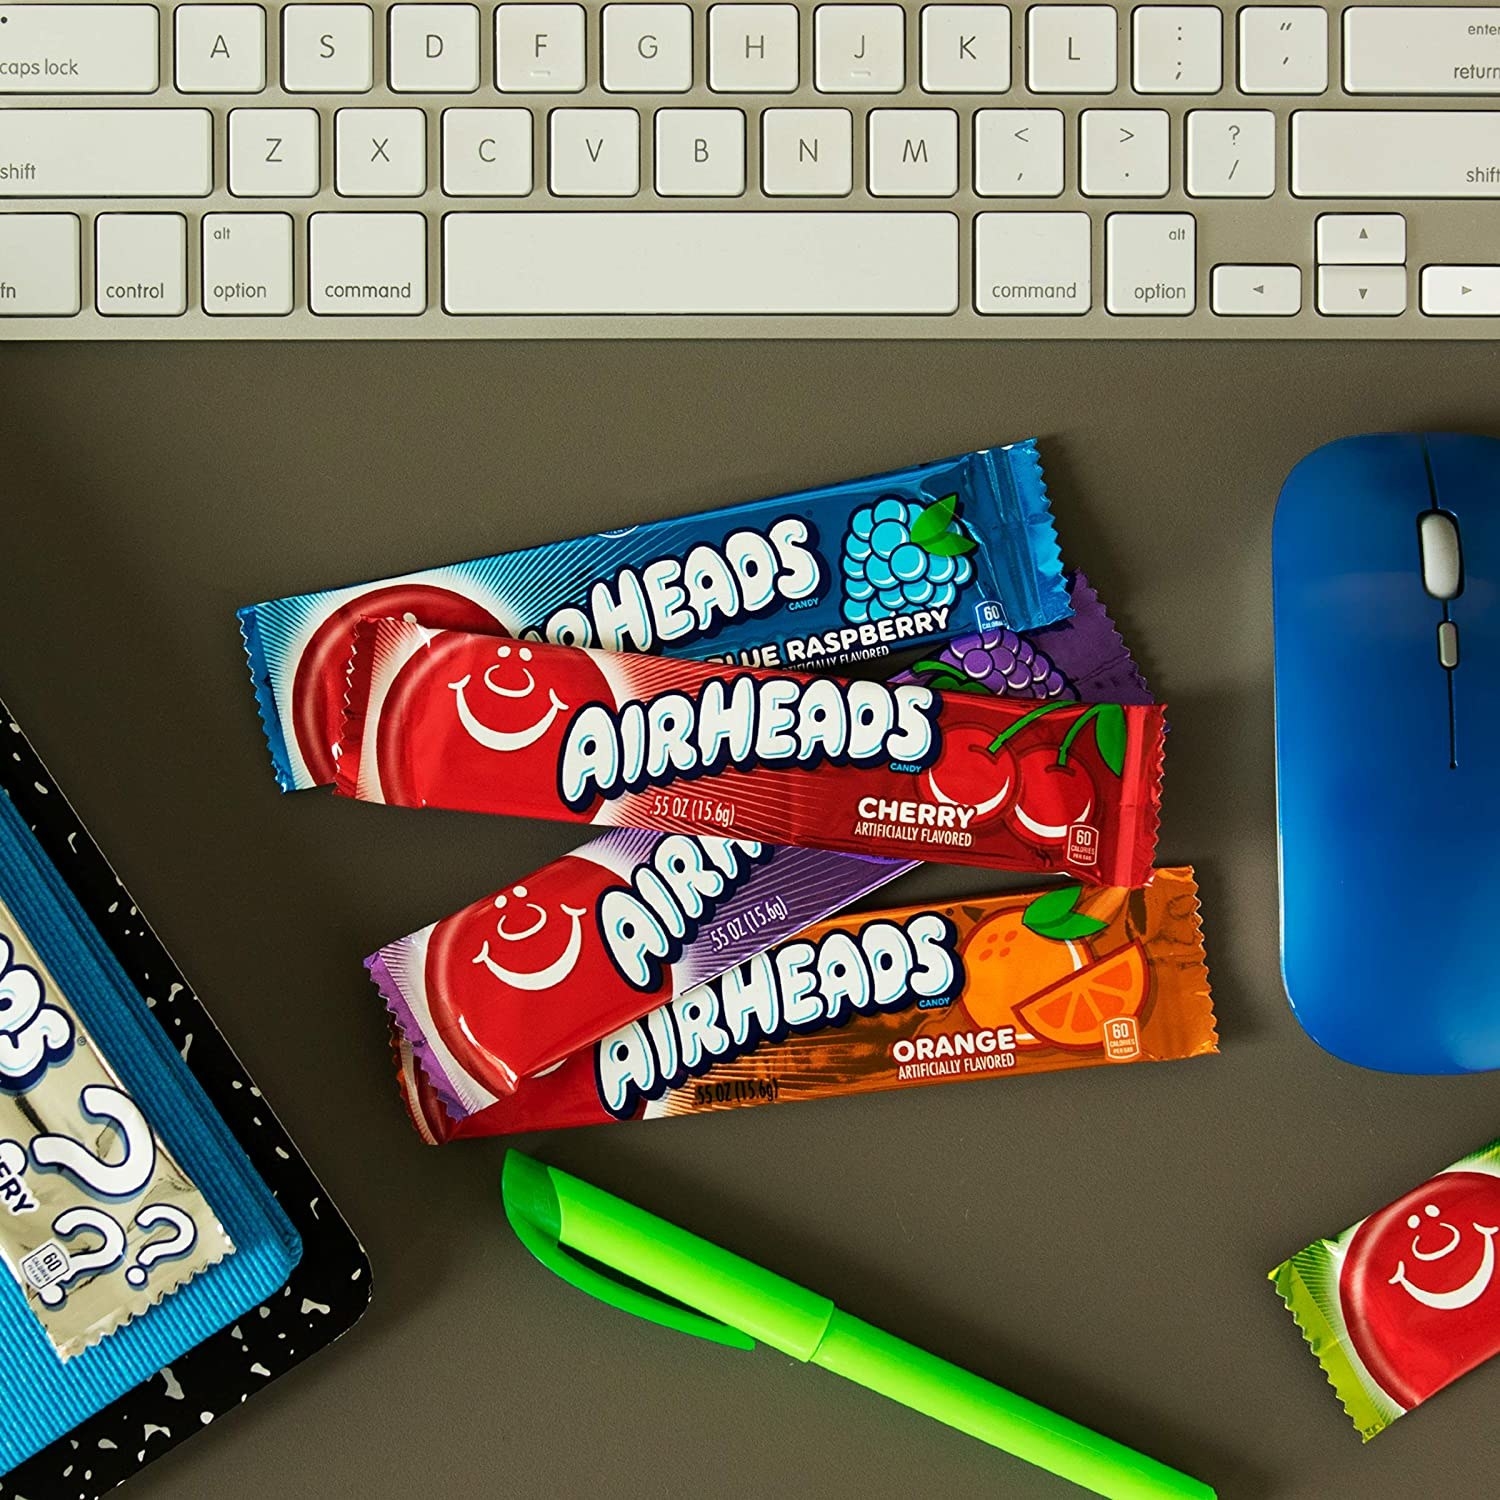 Airheads next to a keyboard on a desk